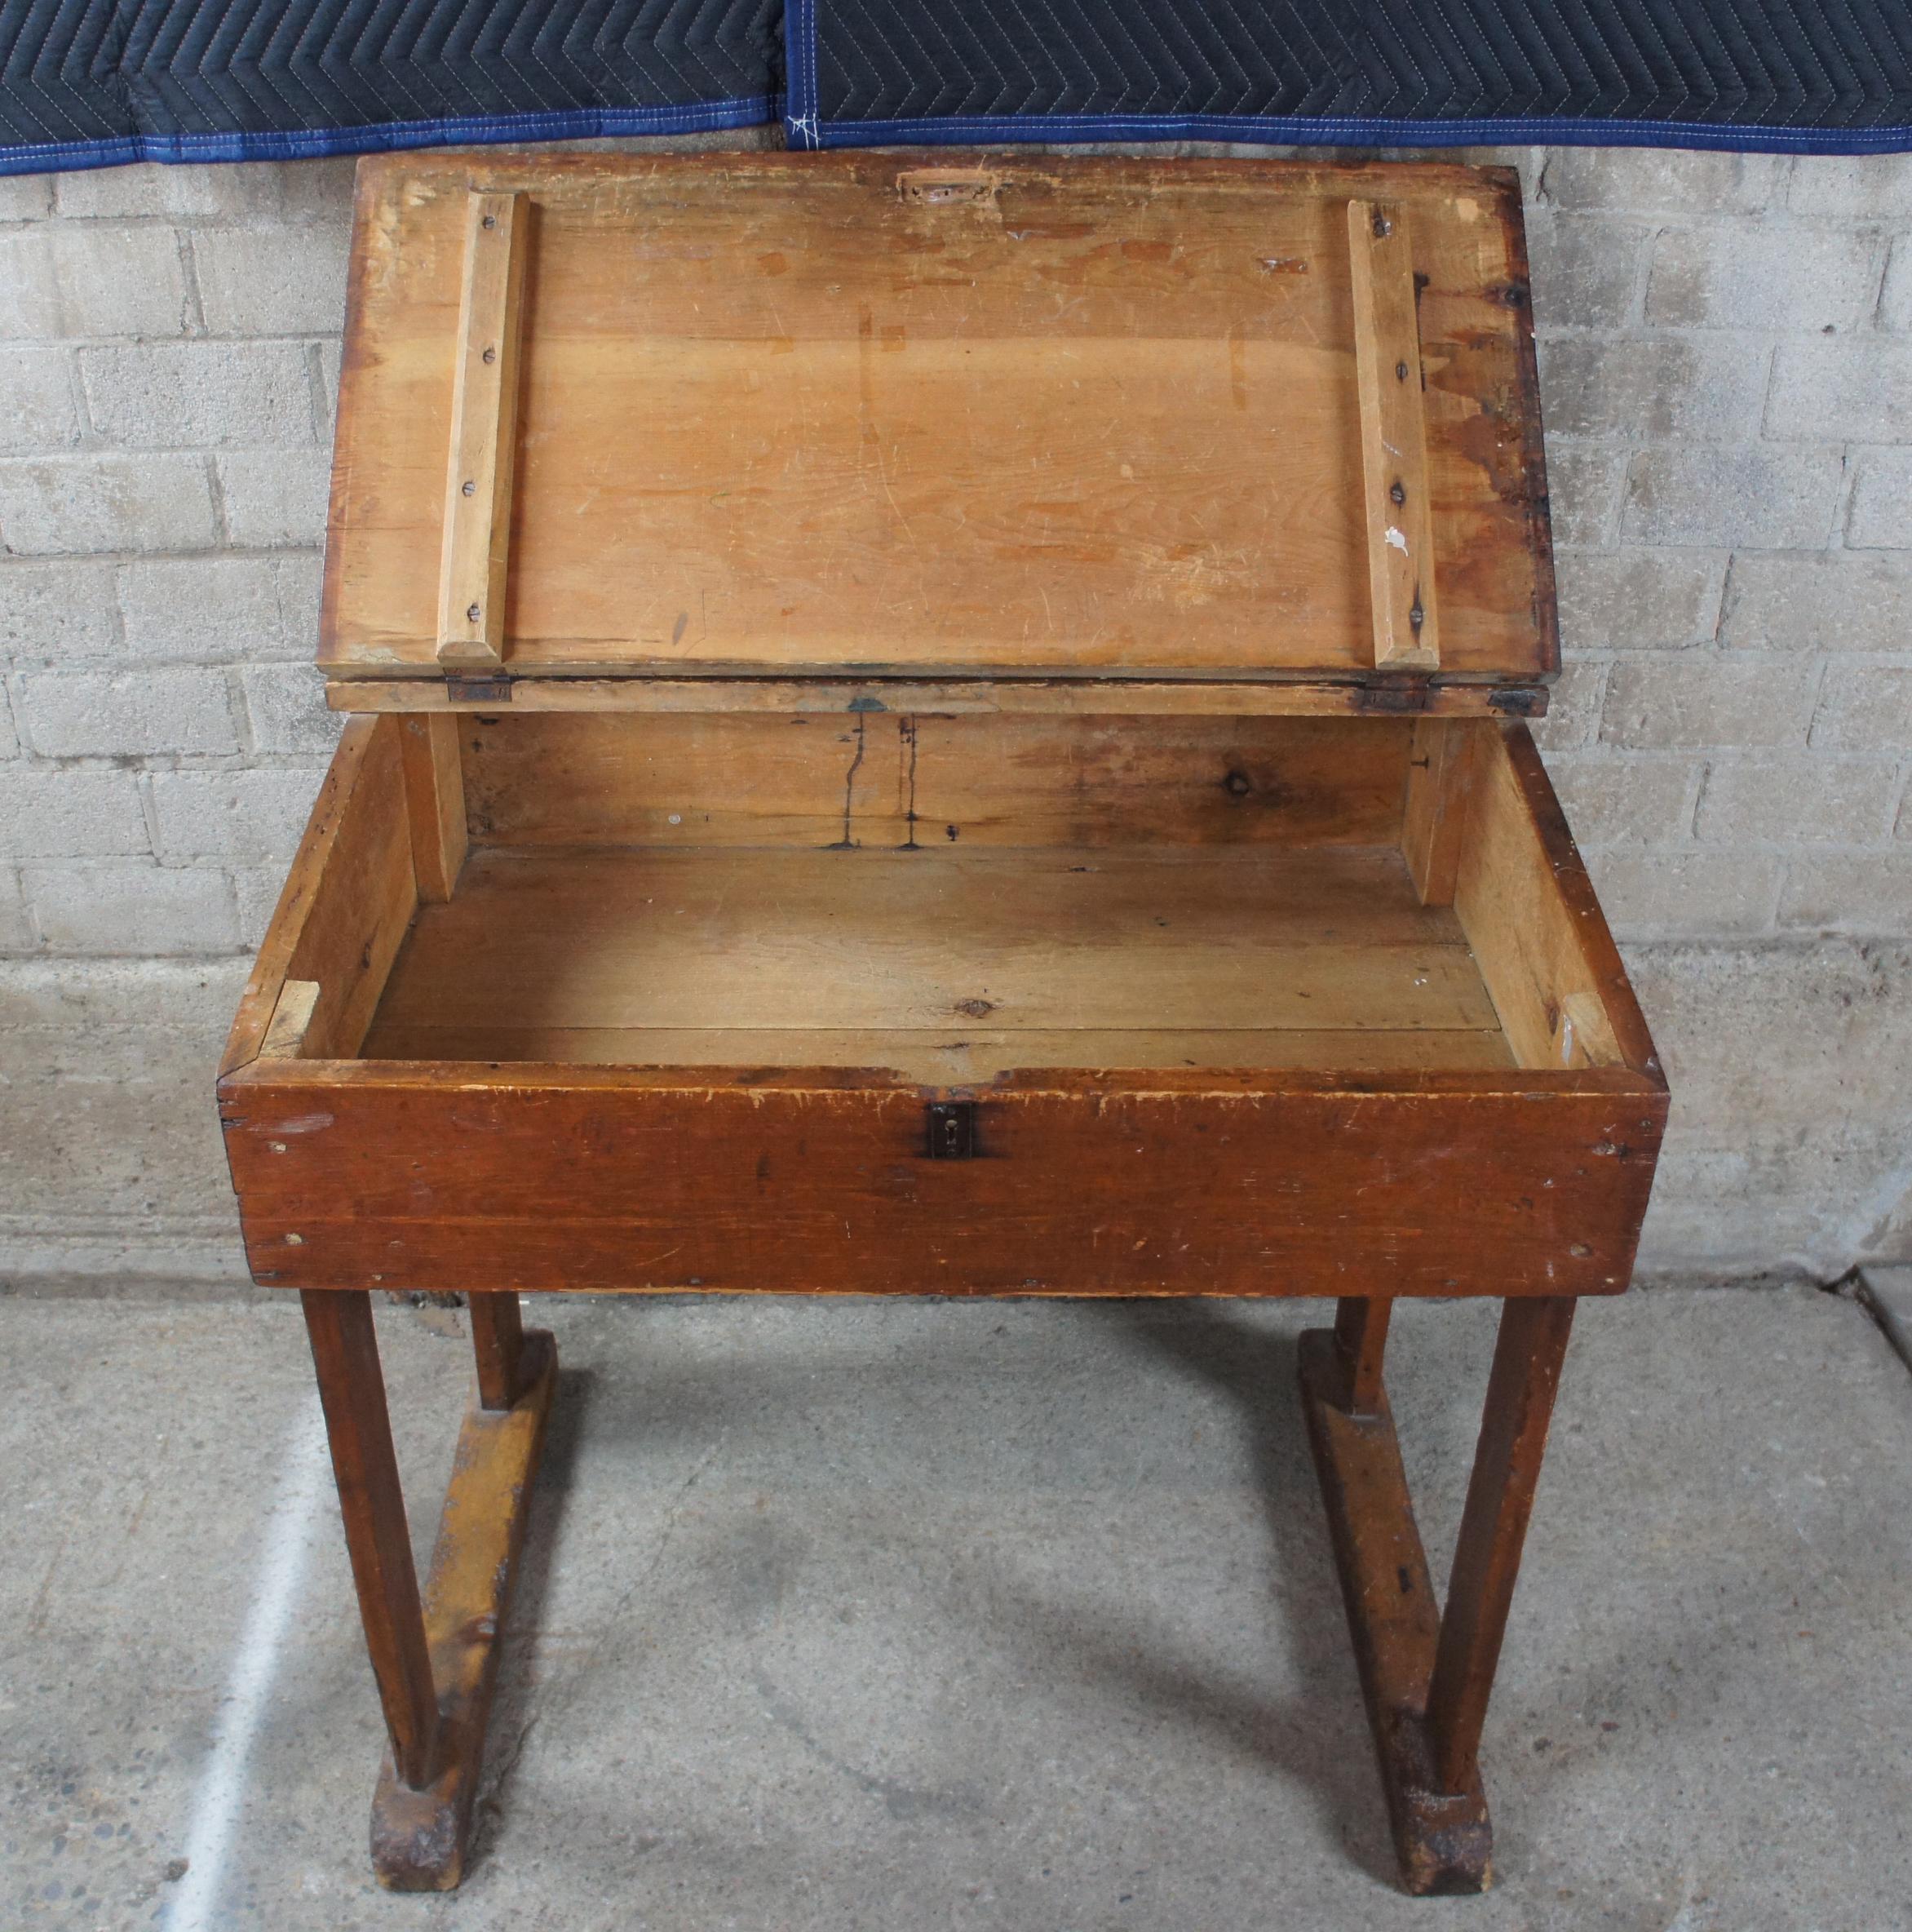 Rustic Primitive Antique Early American Pine Slant Top Writing Desk Country Farmhouse